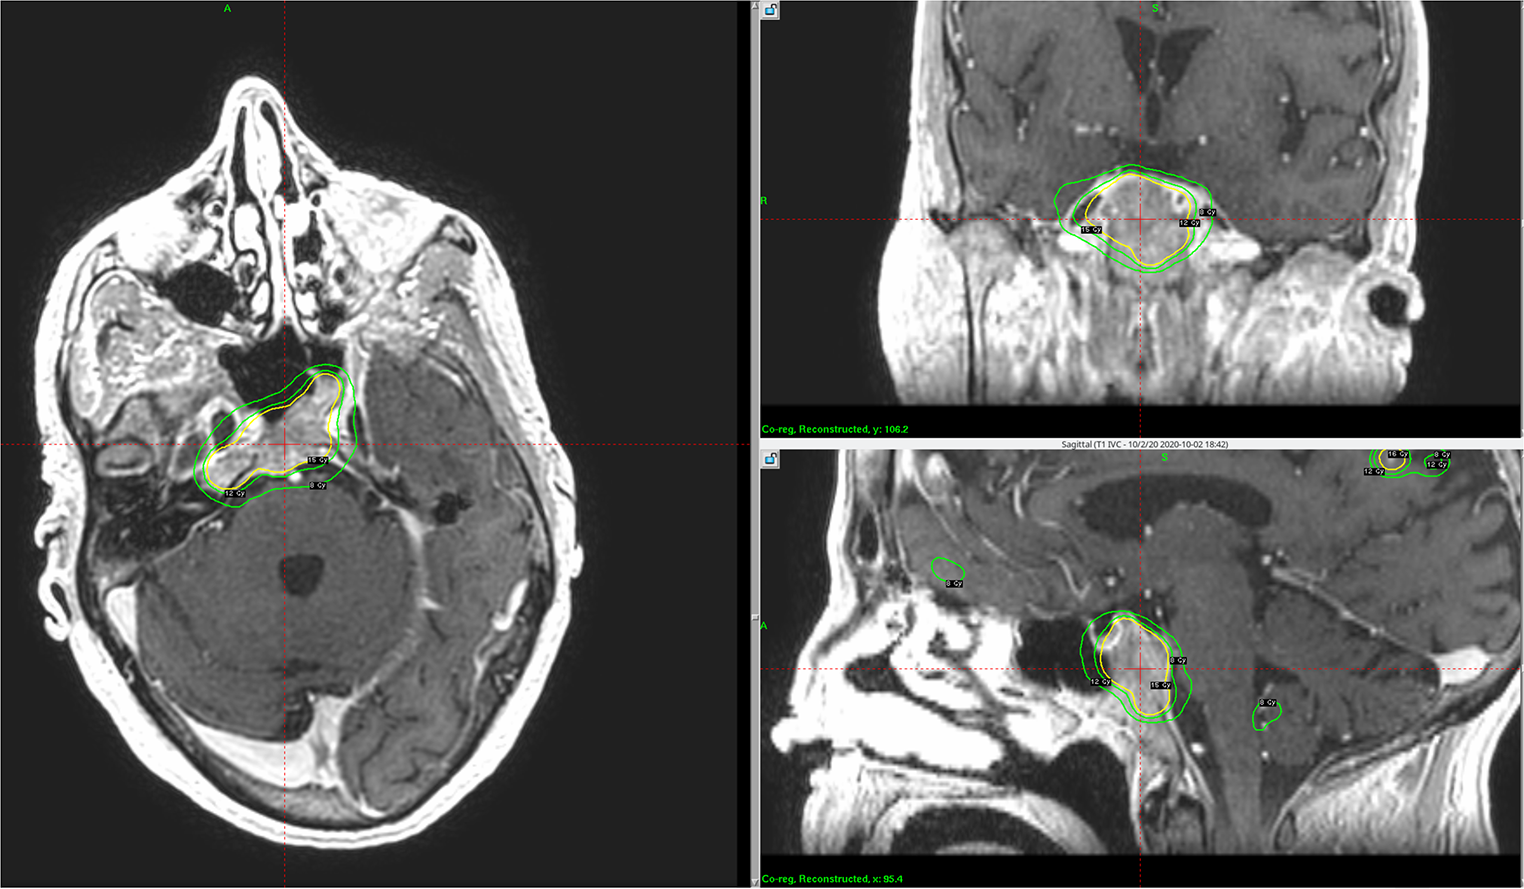 Gamma knife radiosurgery for clival metastasis: case series and systematic review